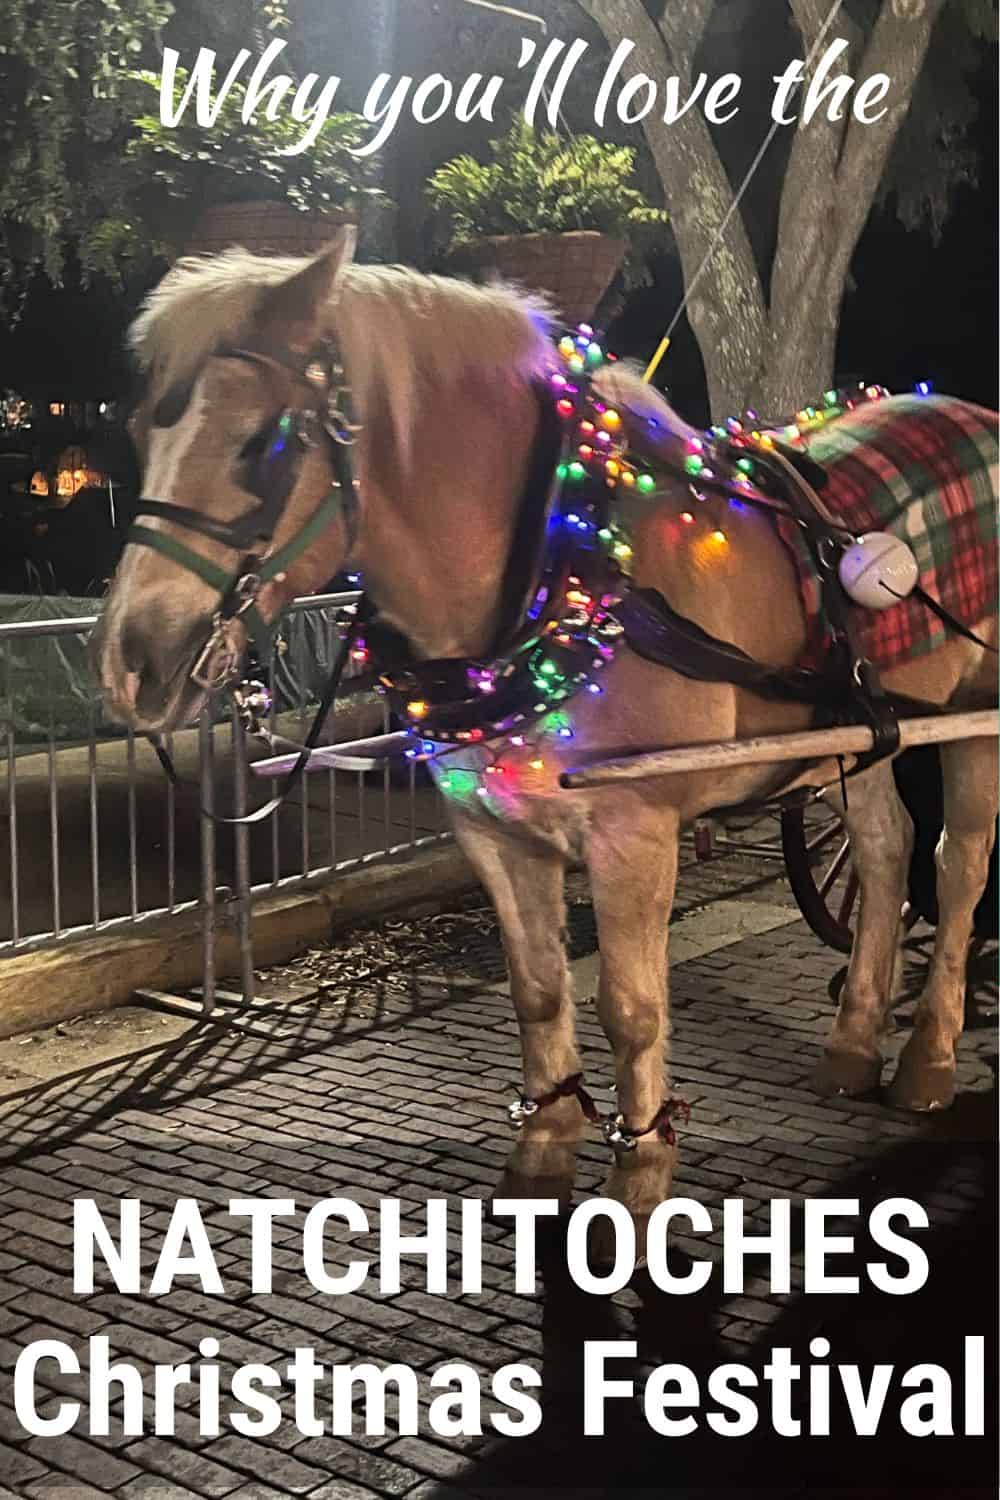 Why you'll love the Natchitoches Christmas Festival?